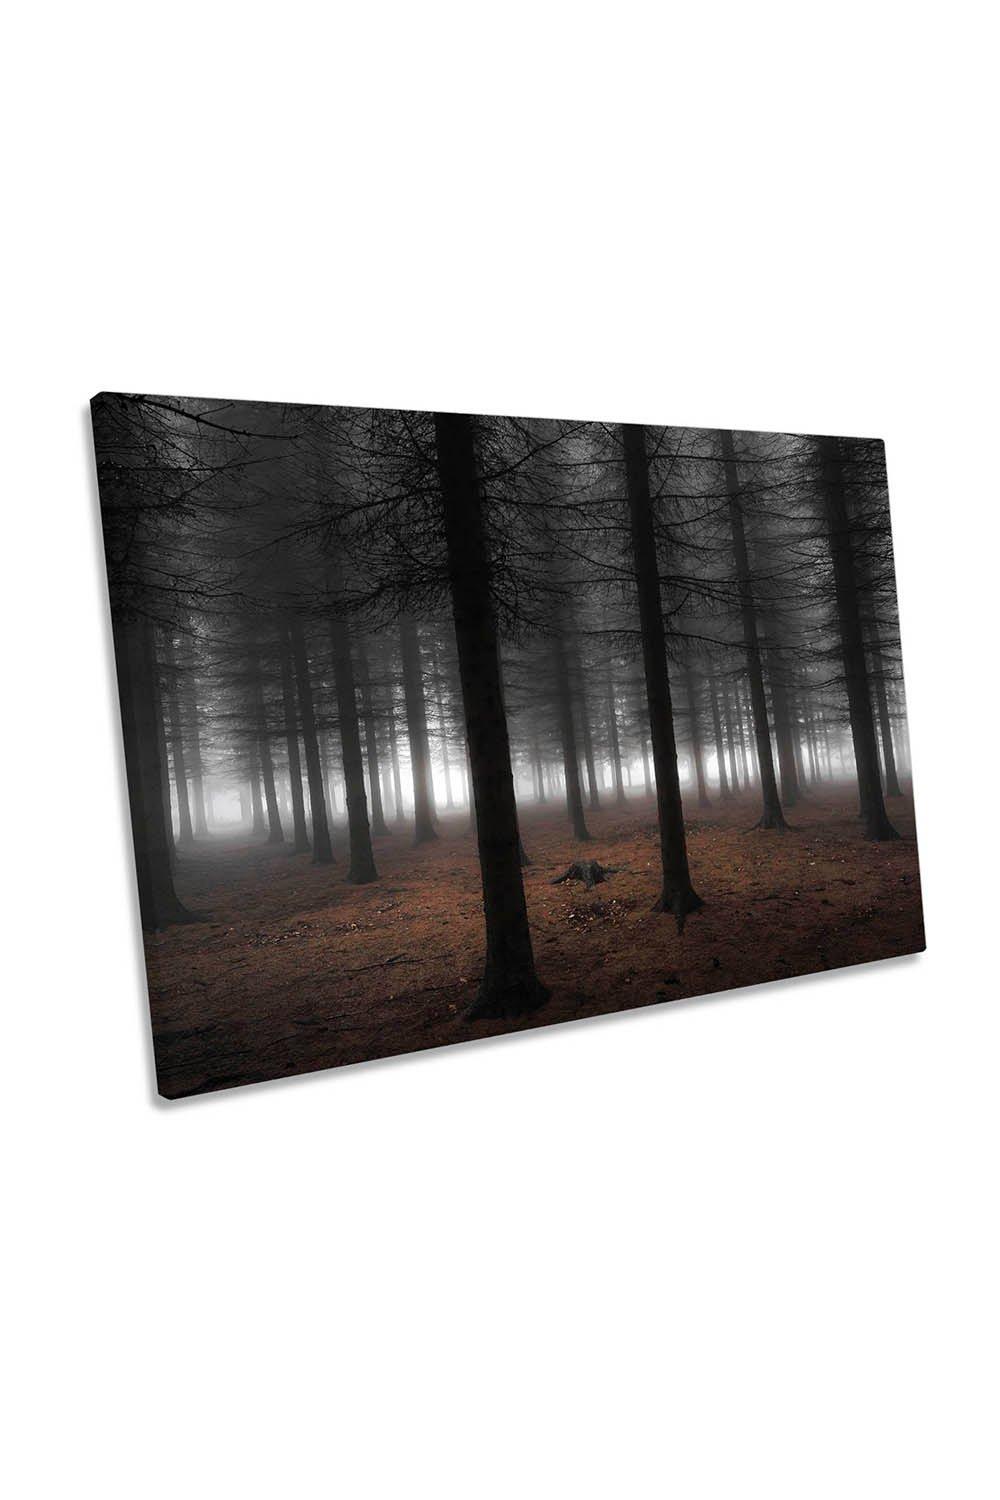 Silence Forest Moody Landscape Canvas Wall Art Picture Print